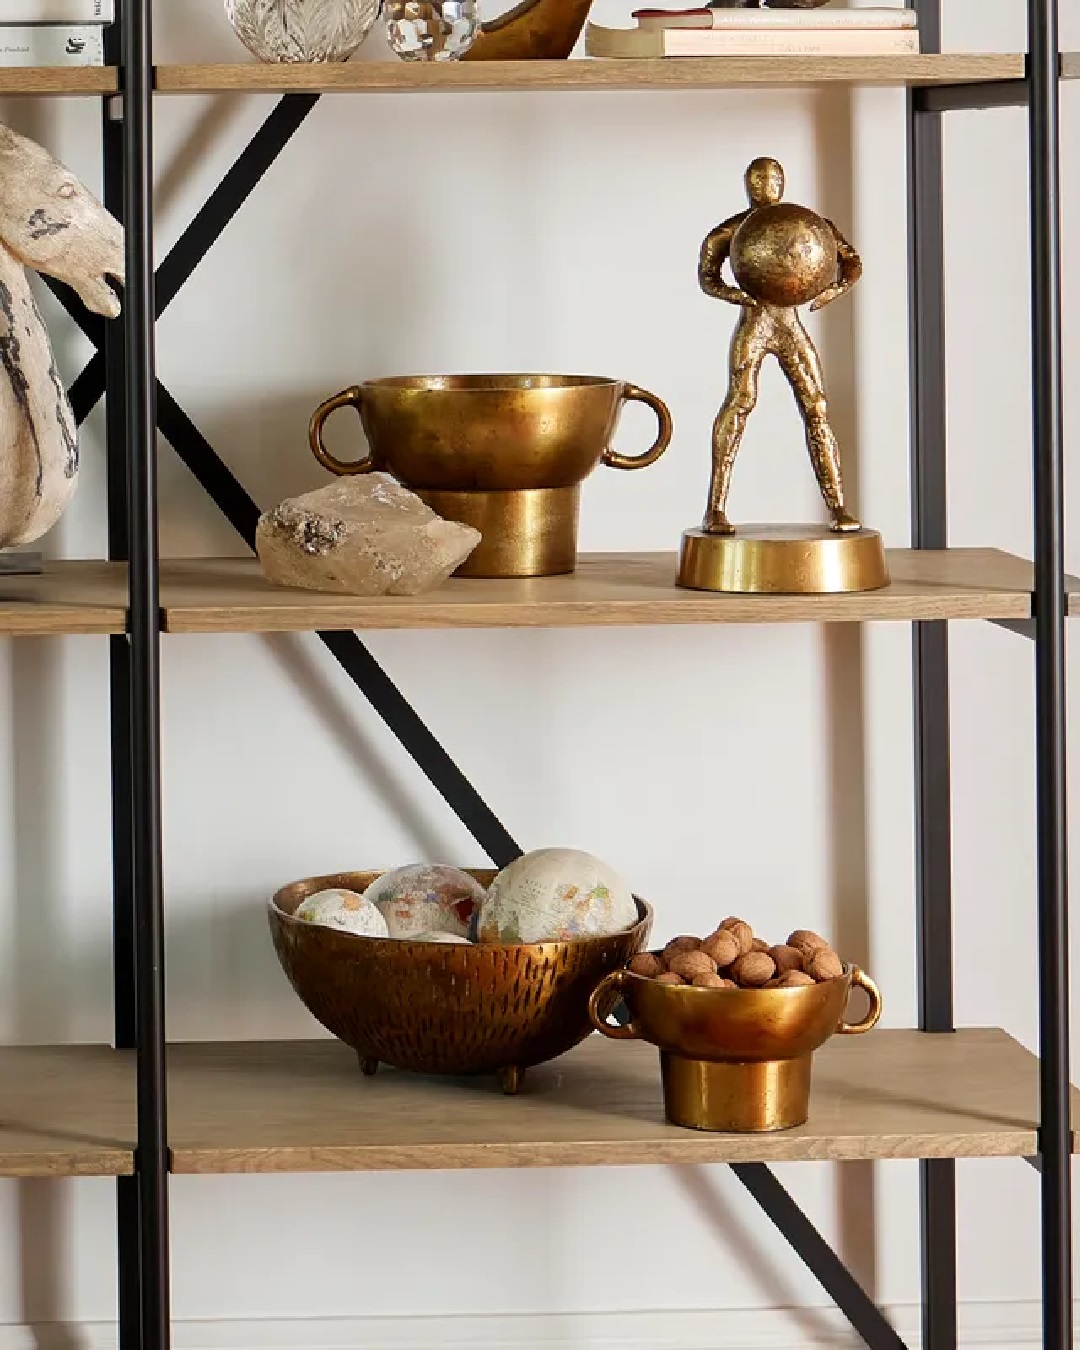 Display of urns and bowls on shelving